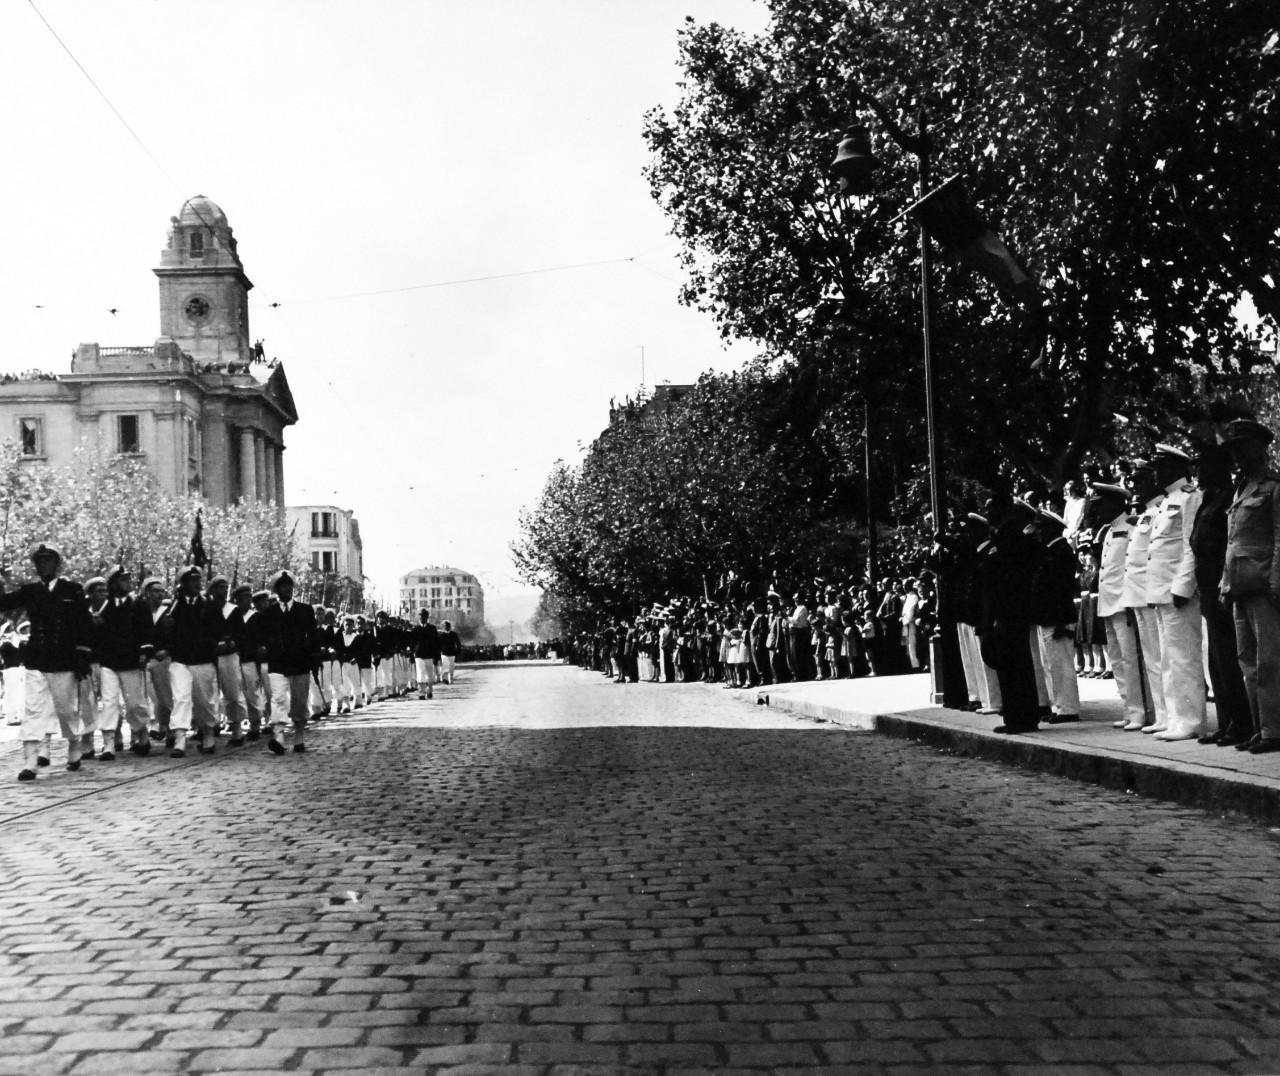 80-G-248727:   Invasion of Southern France, Toulon,  September 1944.   Ceremonies in Toulon celebrating the liberation of France.  Taken by USS Philadelphia (CL-41), 14 September 1944.   General scene during the parade.  Official U.S. Navy Photograph, now in the collection of the National Archives.  (2014/4/10). 